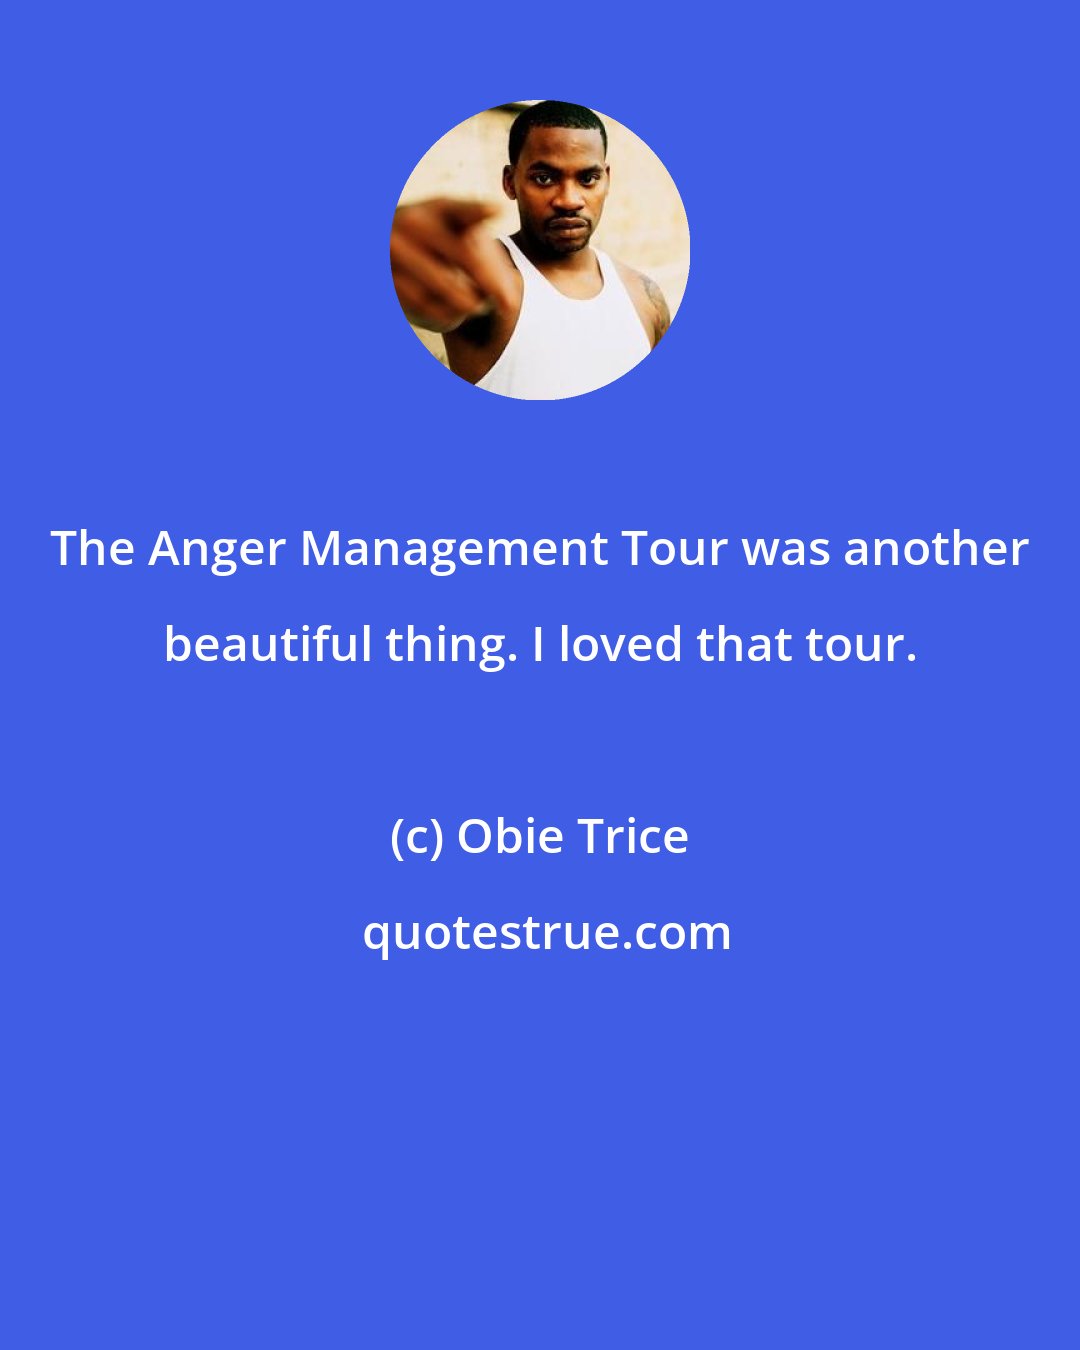 Obie Trice: The Anger Management Tour was another beautiful thing. I loved that tour.